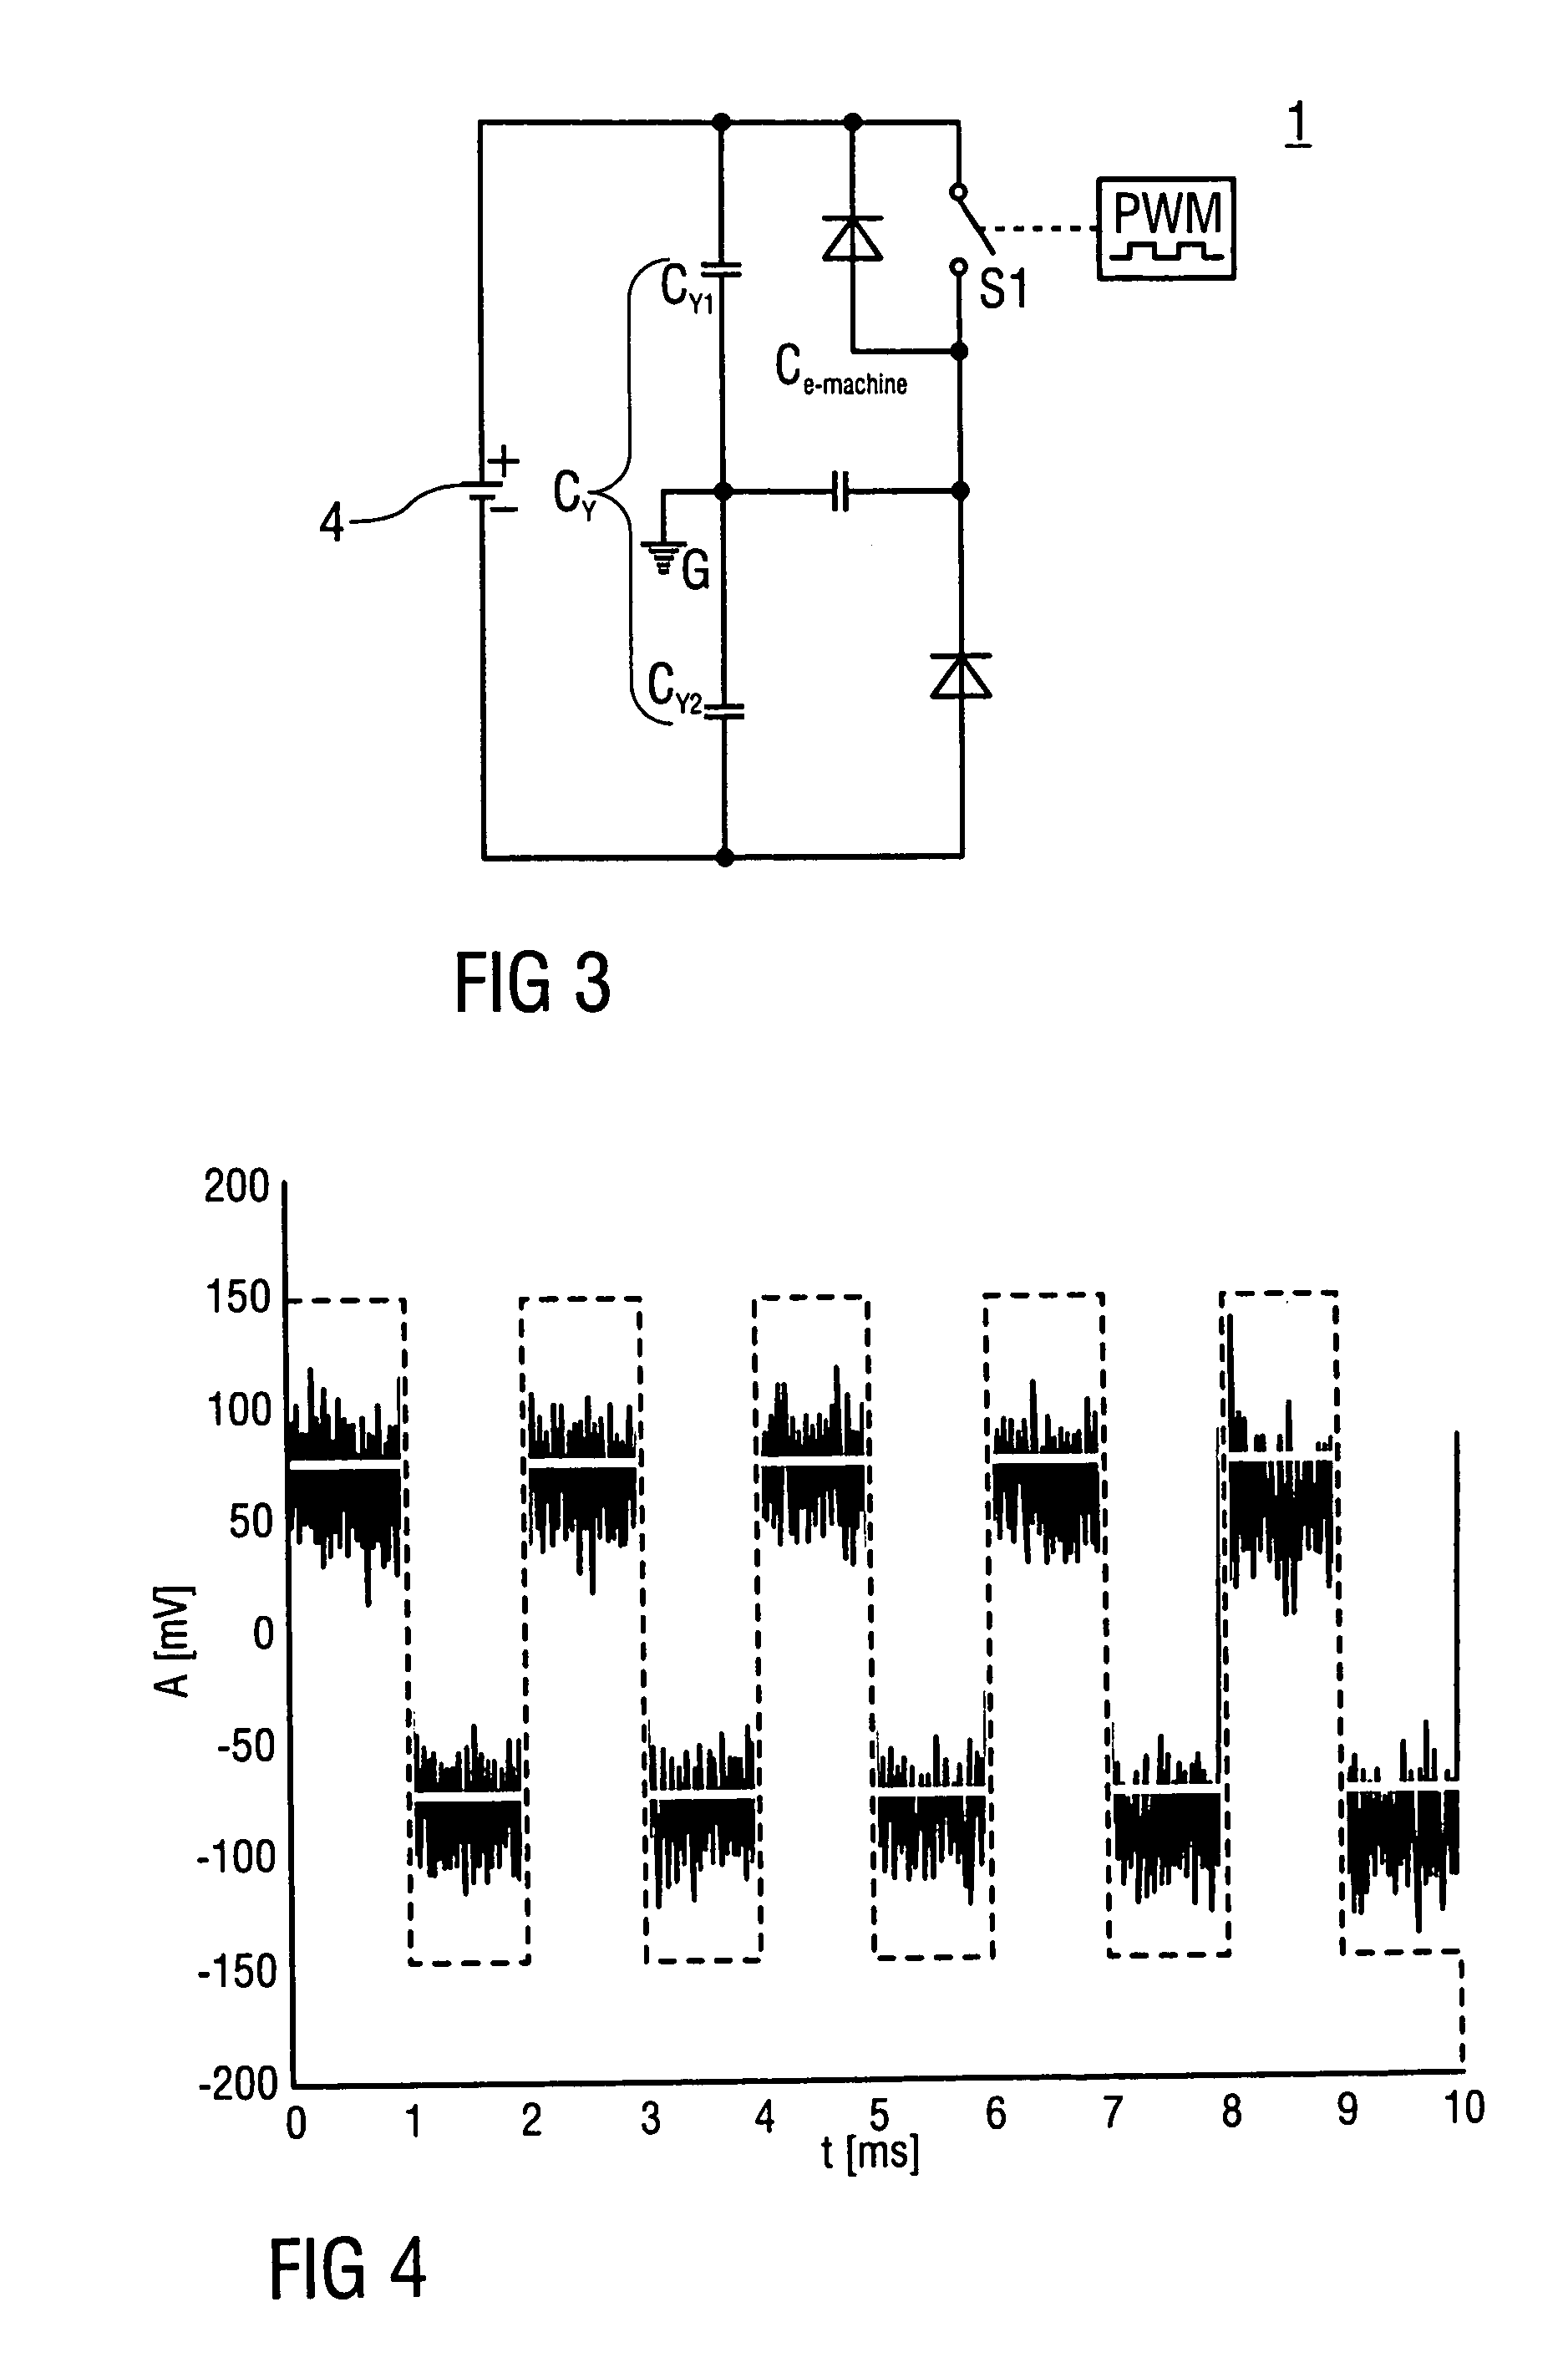 Method for detecting an inverter hardware failure in an electric power train